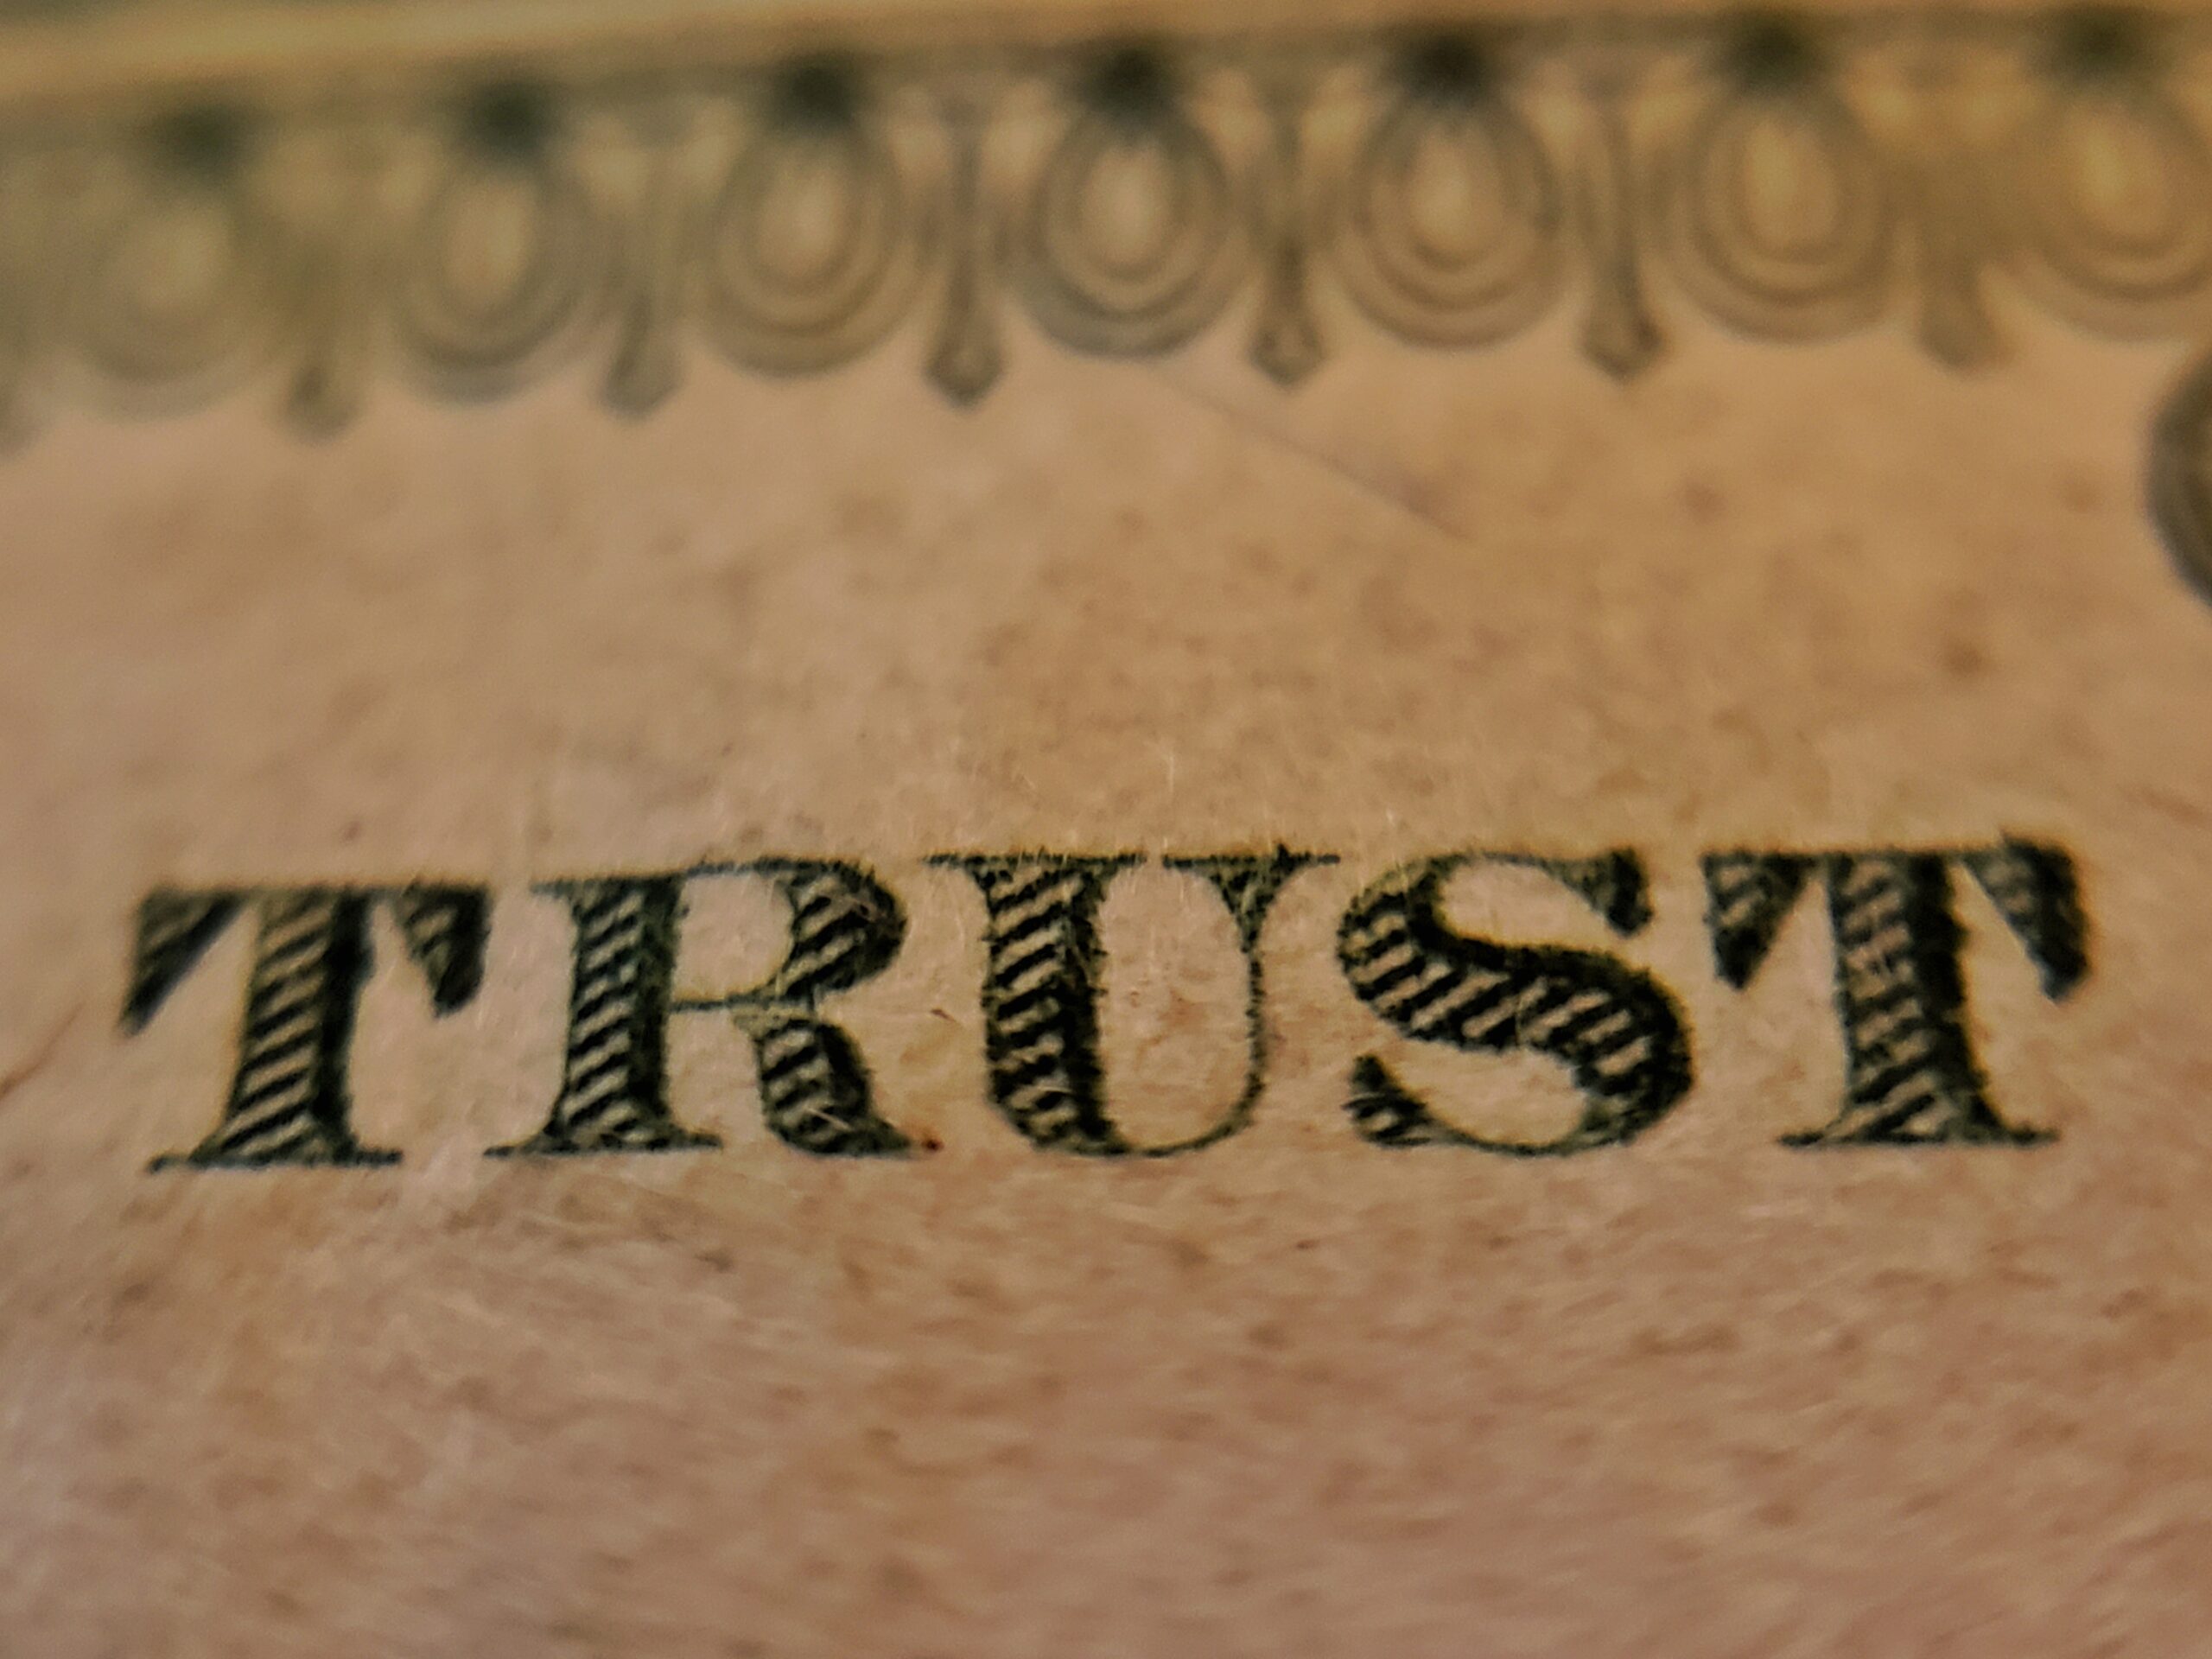 Digital or in-person, fundamental trust in credit unions remains the same